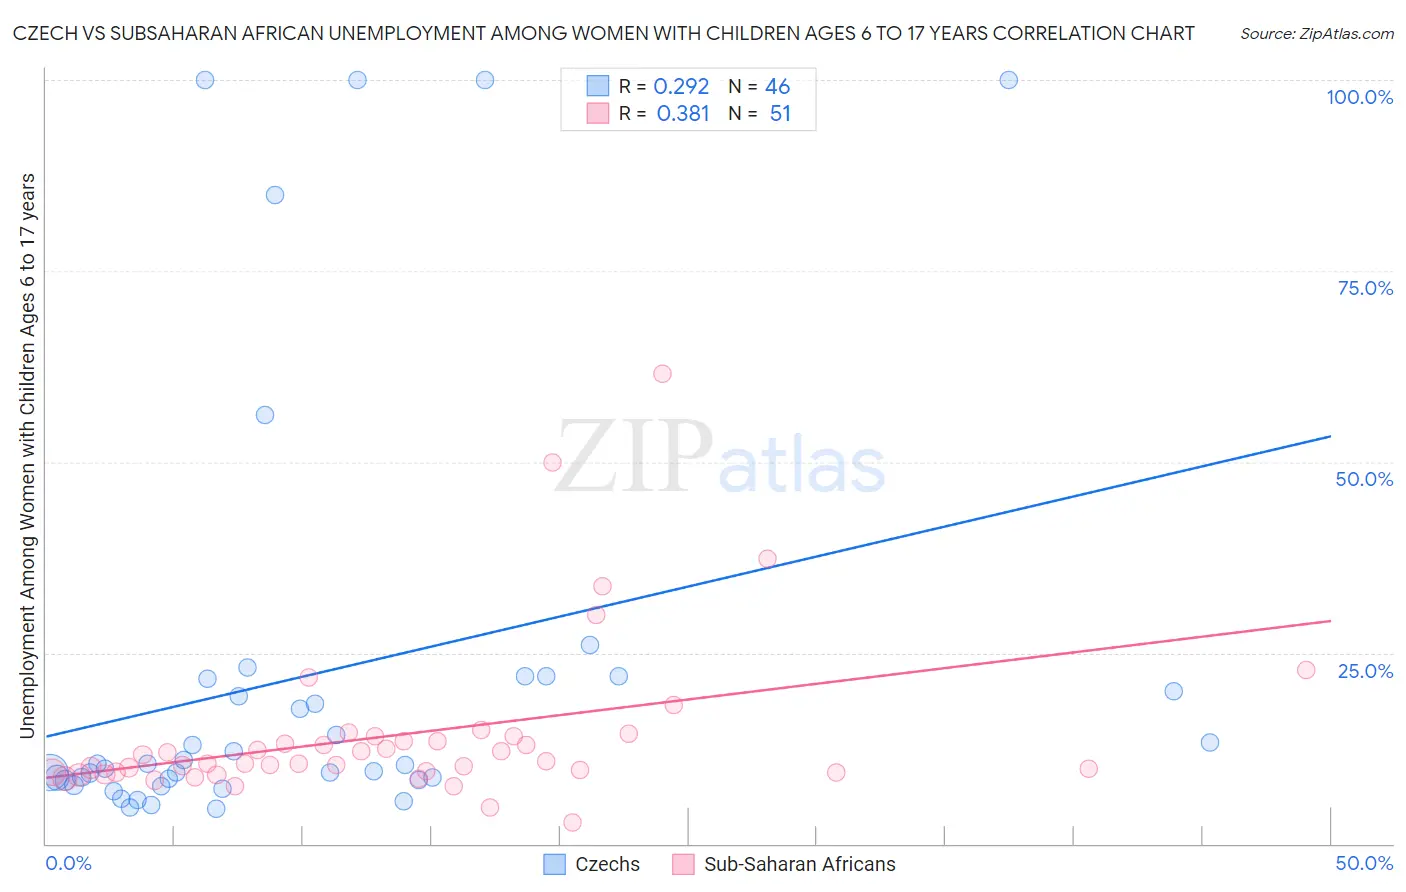 Czech vs Subsaharan African Unemployment Among Women with Children Ages 6 to 17 years